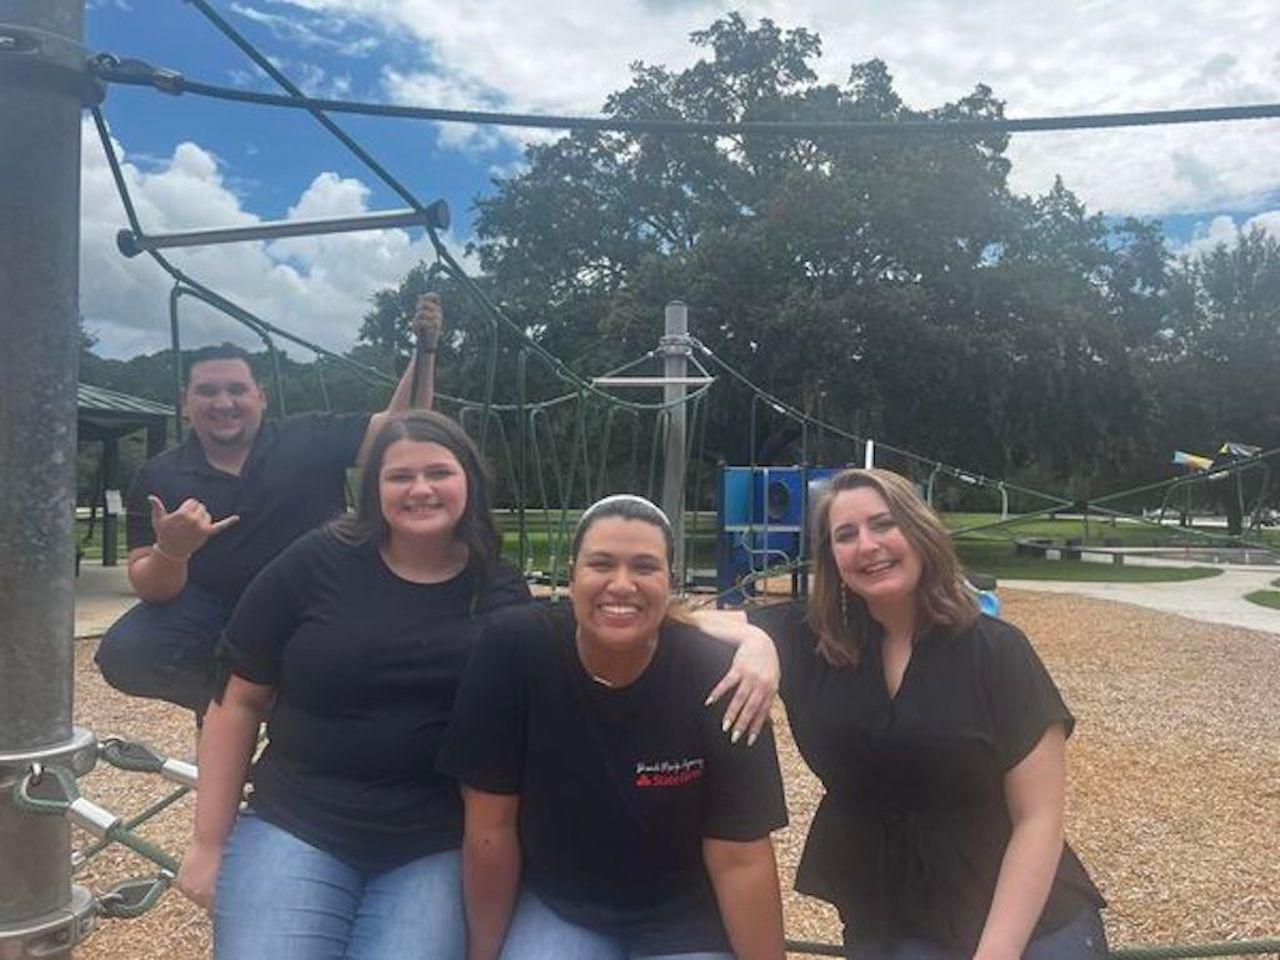 Today, some of our  BMSF family enjoyed a picnic lunch at the park! What are some traditions you like to do with your family?